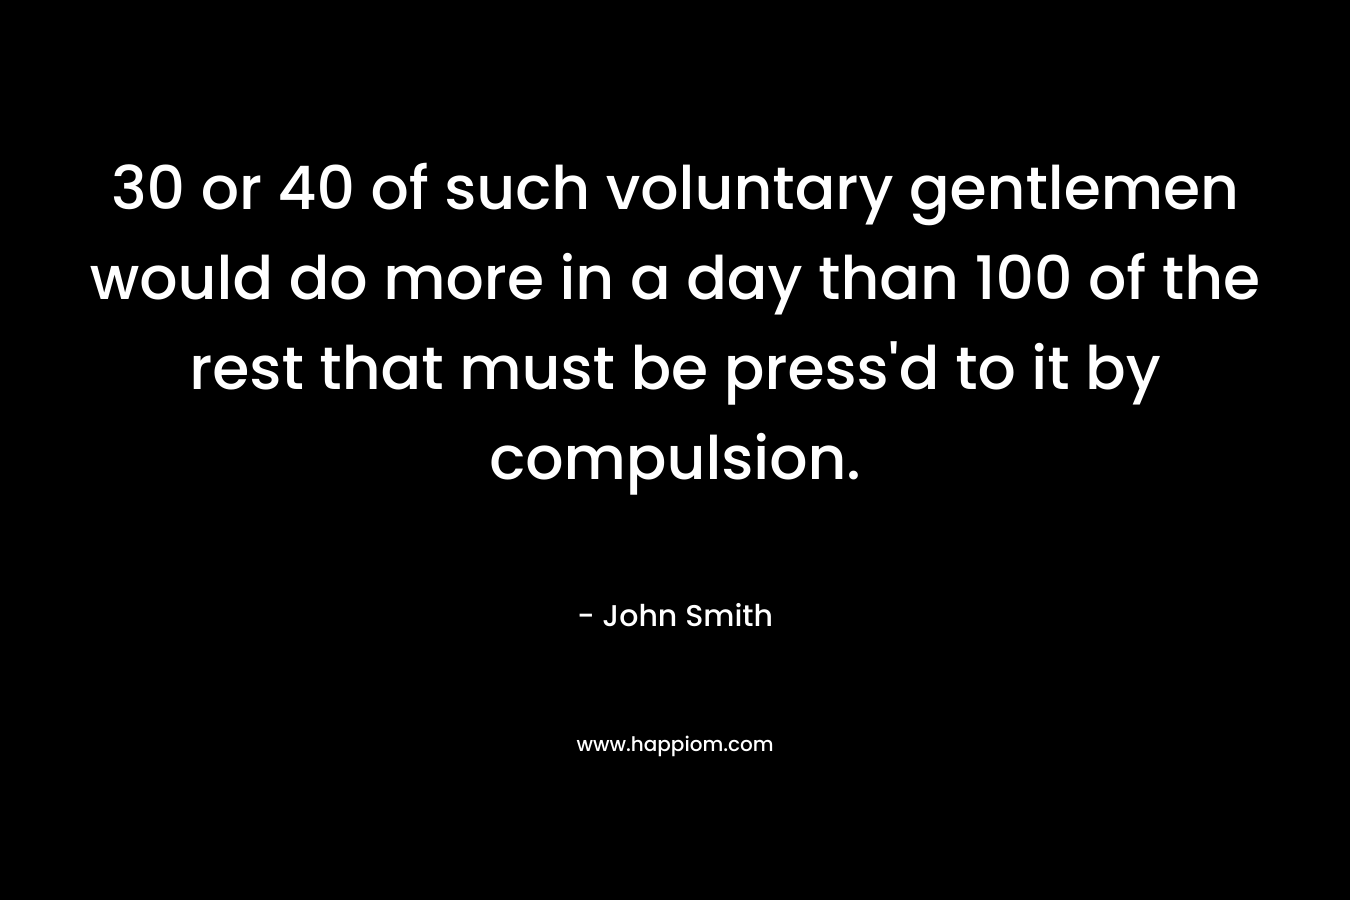 30 or 40 of such voluntary gentlemen would do more in a day than 100 of the rest that must be press’d to it by compulsion. – John Smith